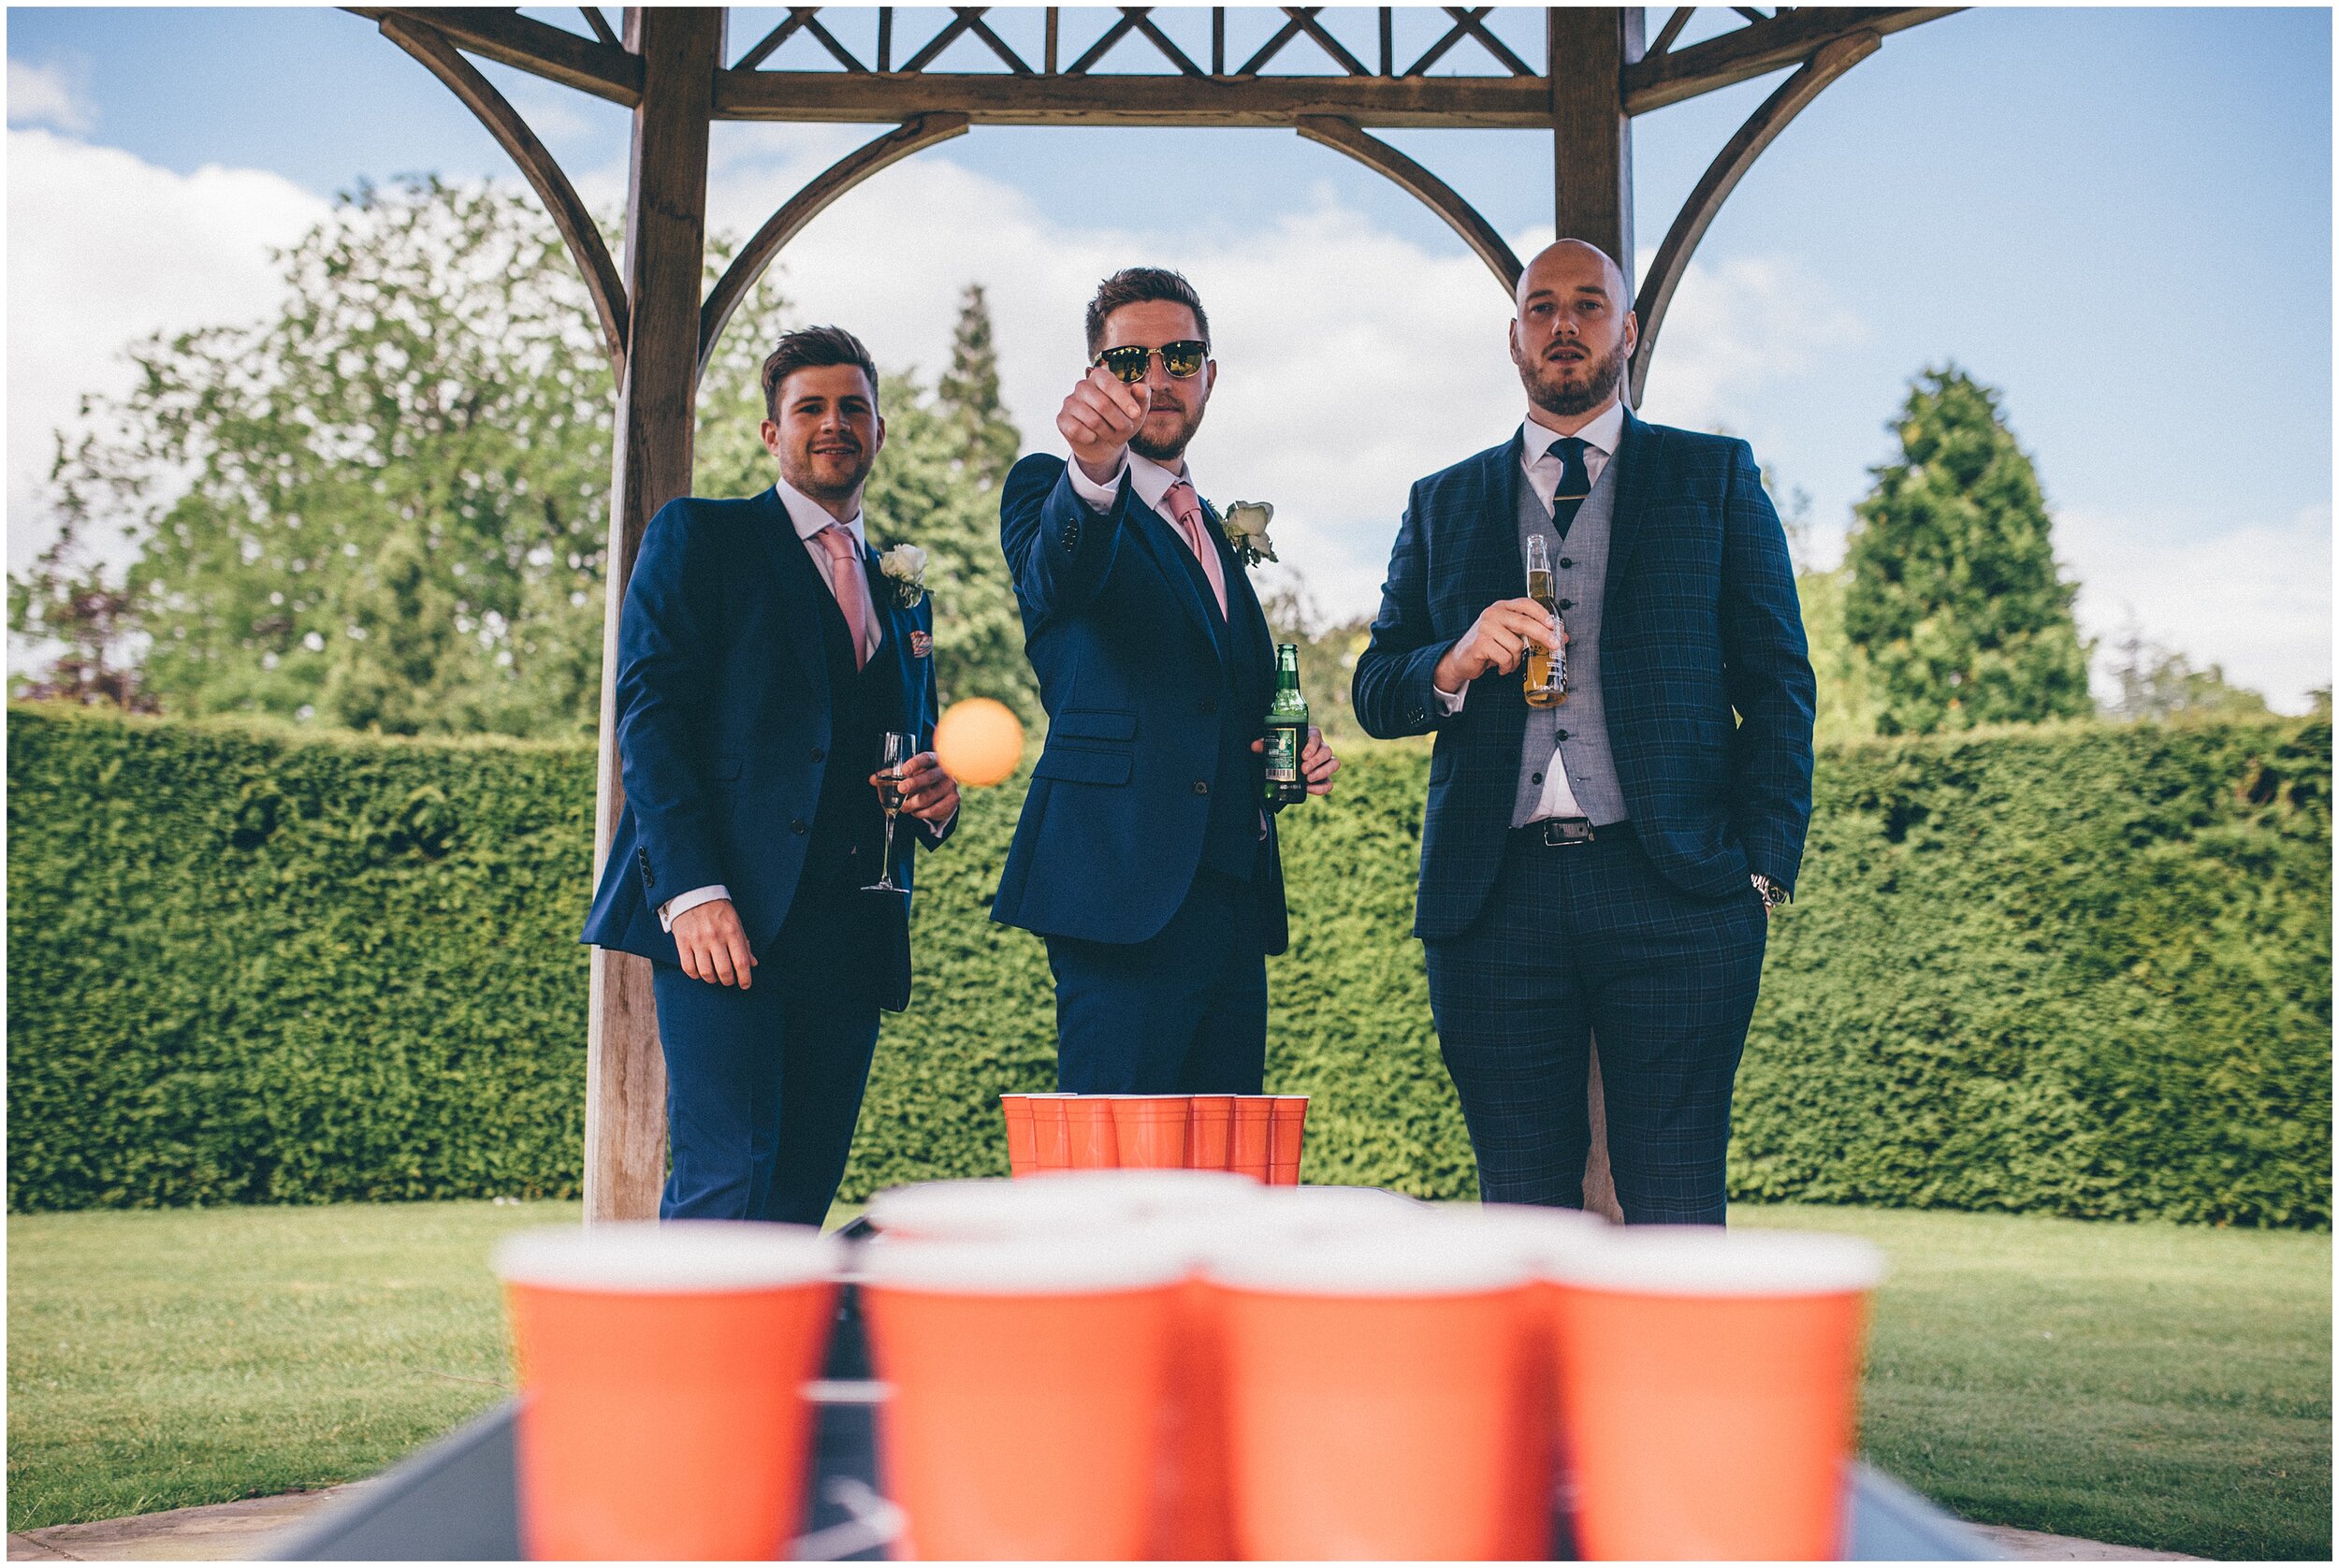 Fun game of Beer pong at a Cheshire wedding.